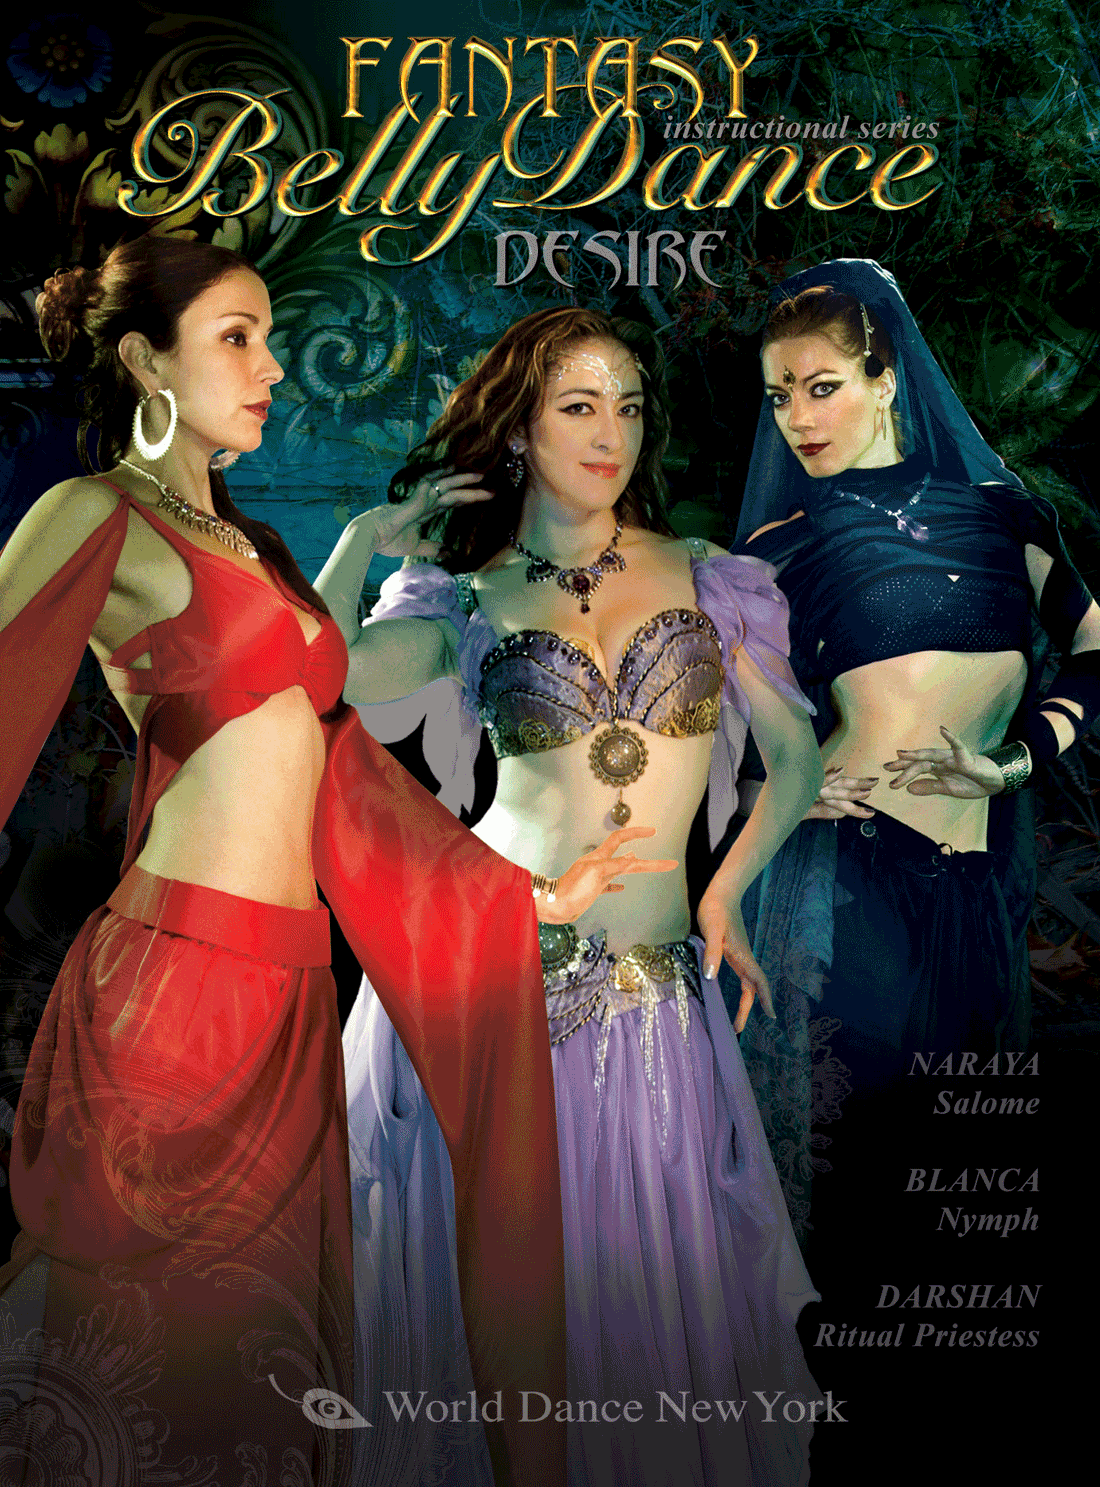 Fantasy Belly Dance: Desire - 3 belly dancing choreographies - INSTANT VIDEO / DVD - World Dance New York